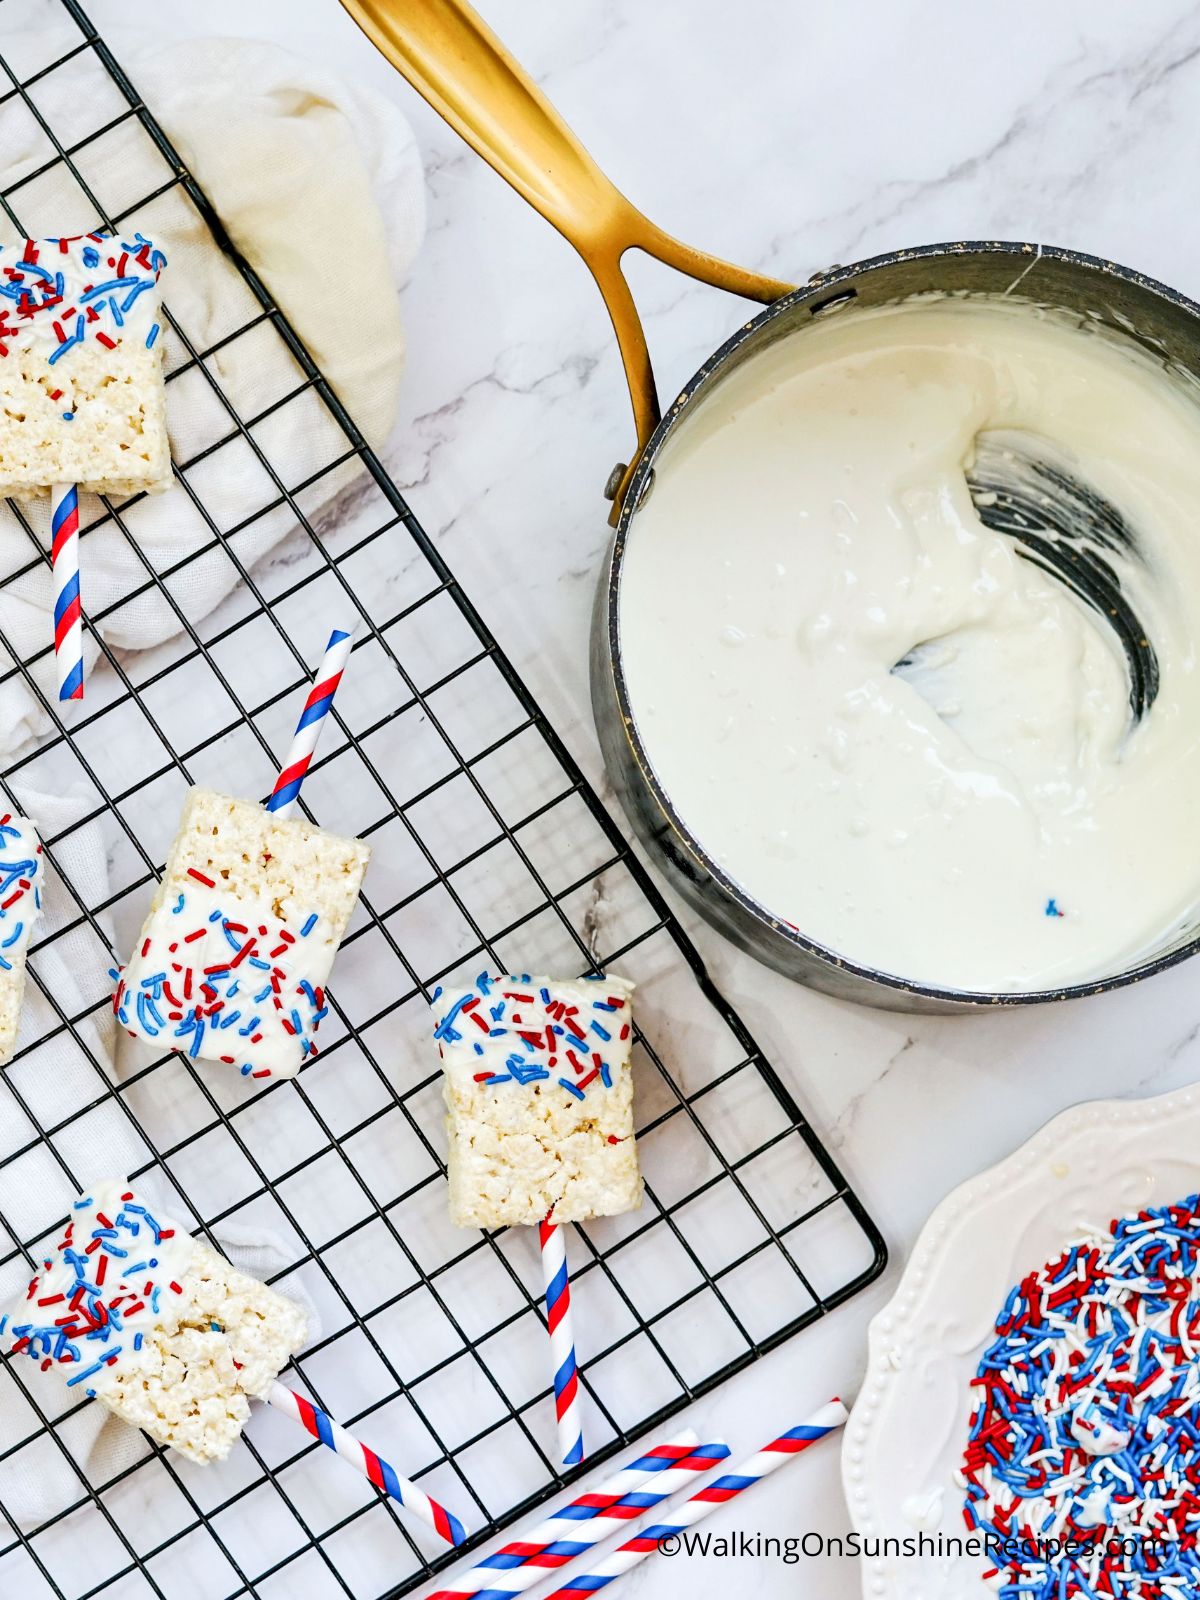 Dip treats in melted white chocolate.